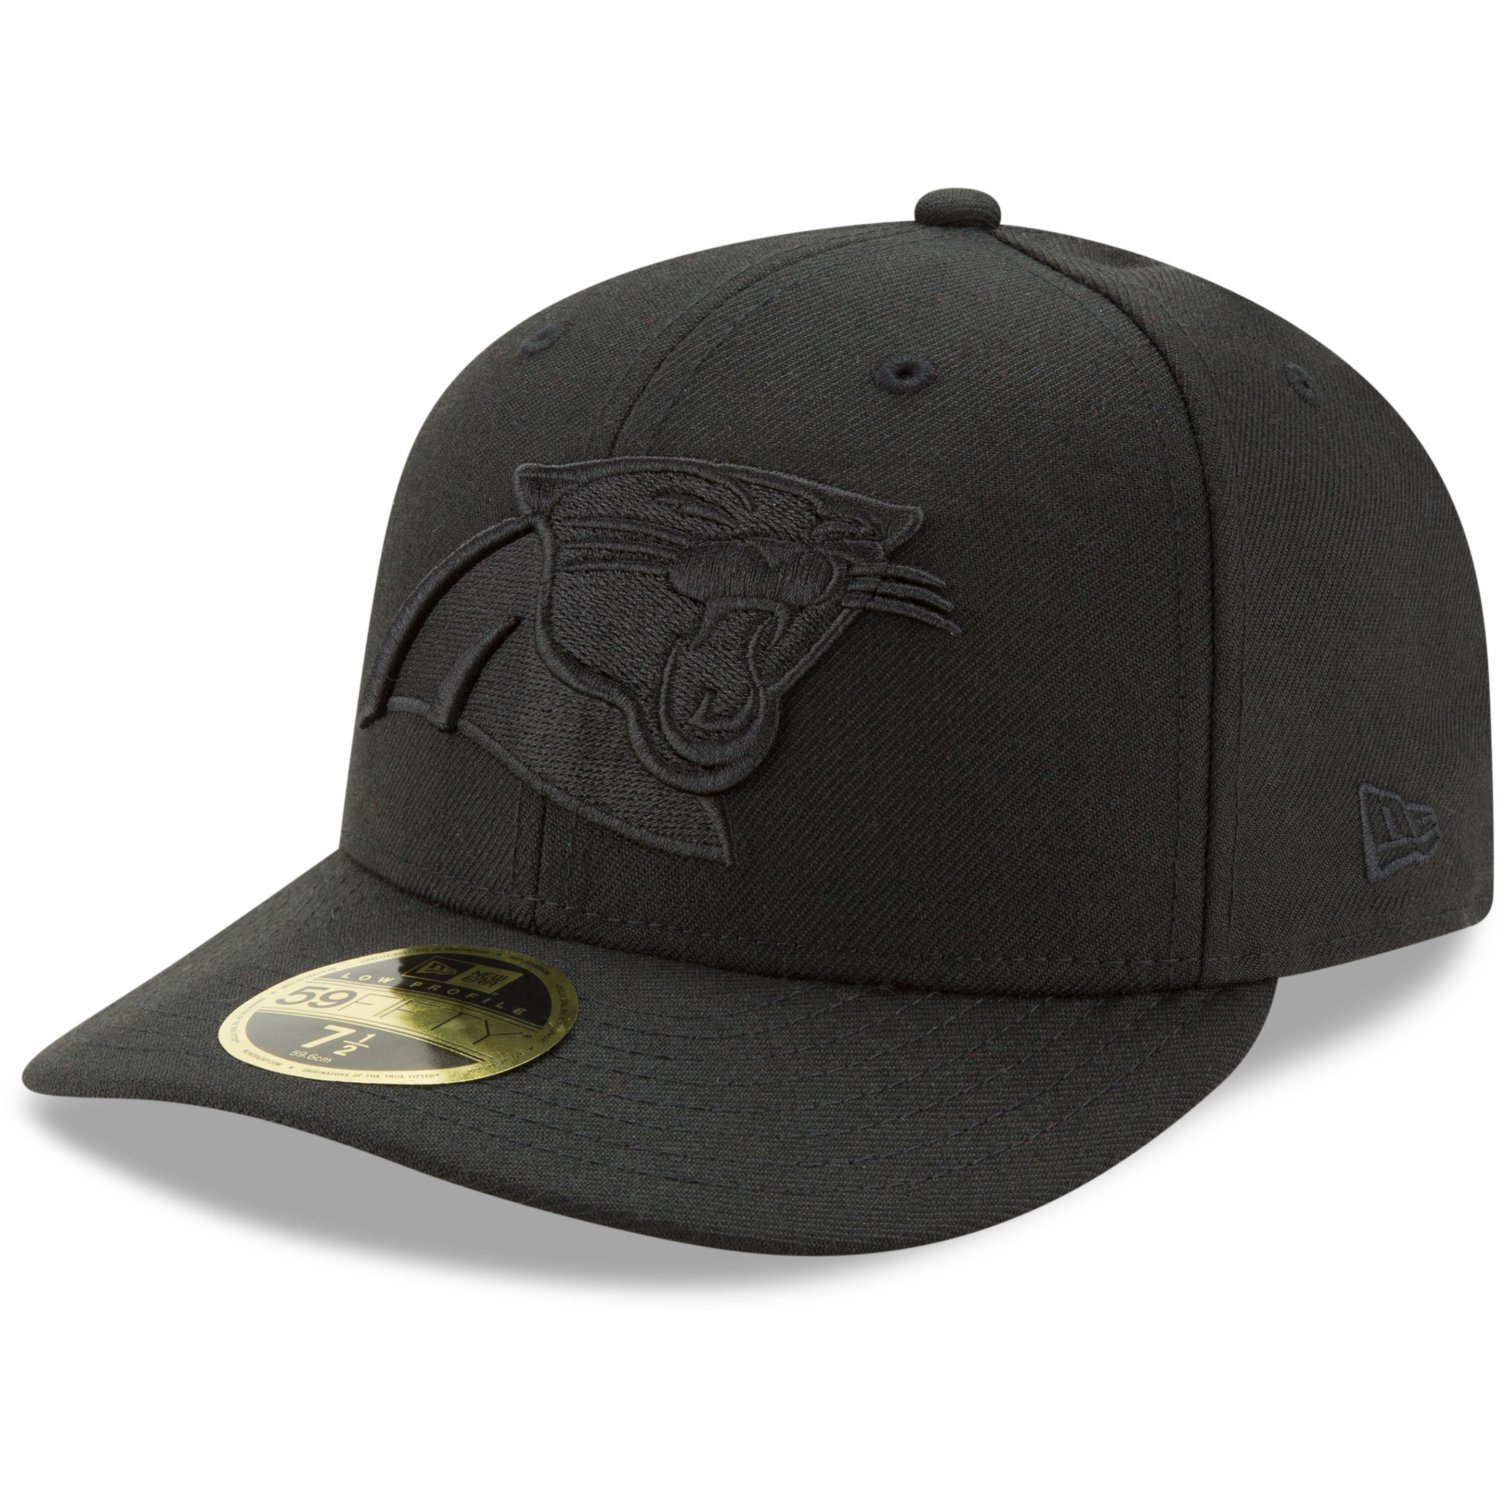 Low Fitted Era Teams Carolina New Panthers Profile 59Fifty NFL Cap